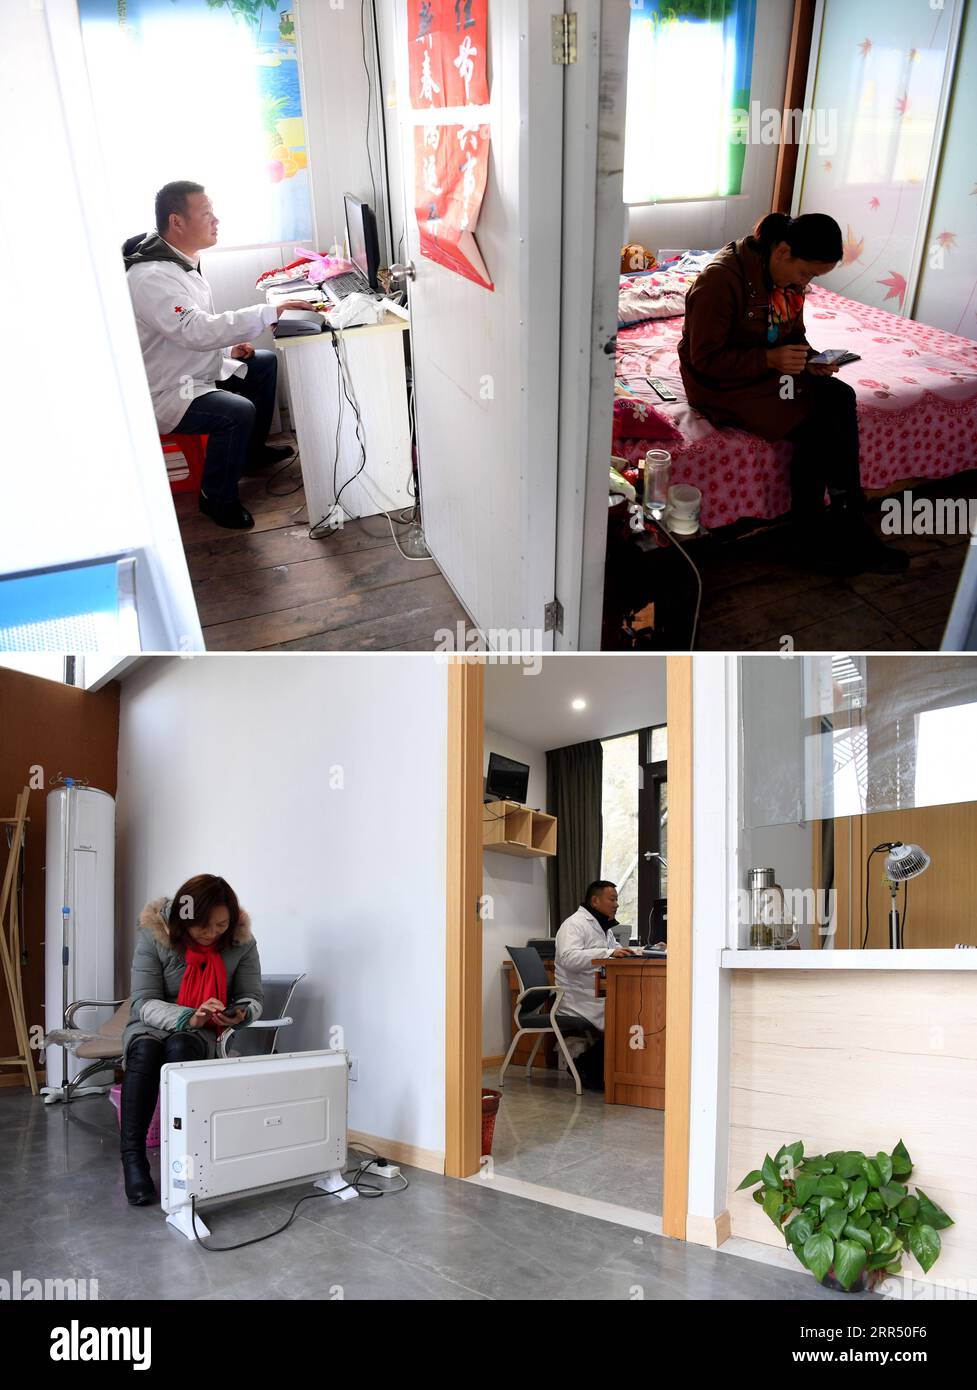 201218 -- JINZHAI, Dec. 18, 2020 -- Combo photo shows Yu Jiajun working at his health station on Nov. 15, 2017 upper and Dec. 16, 2020 lower in Jinzhai County of Luan City, east China s Anhui Province. Deep in the Xianghongdian Reservoir area in Jinzhai County of Luan City, east China s Anhui Province, there is an isolated island, which used to be home to over 40 poor families. Yu Jiajun, 42, is the only doctor in the village. In the past, there was no health station on the island. Villagers had to row a boat for two or three hours to go to the health center in Mabu Township to see the doctor. Stock Photo